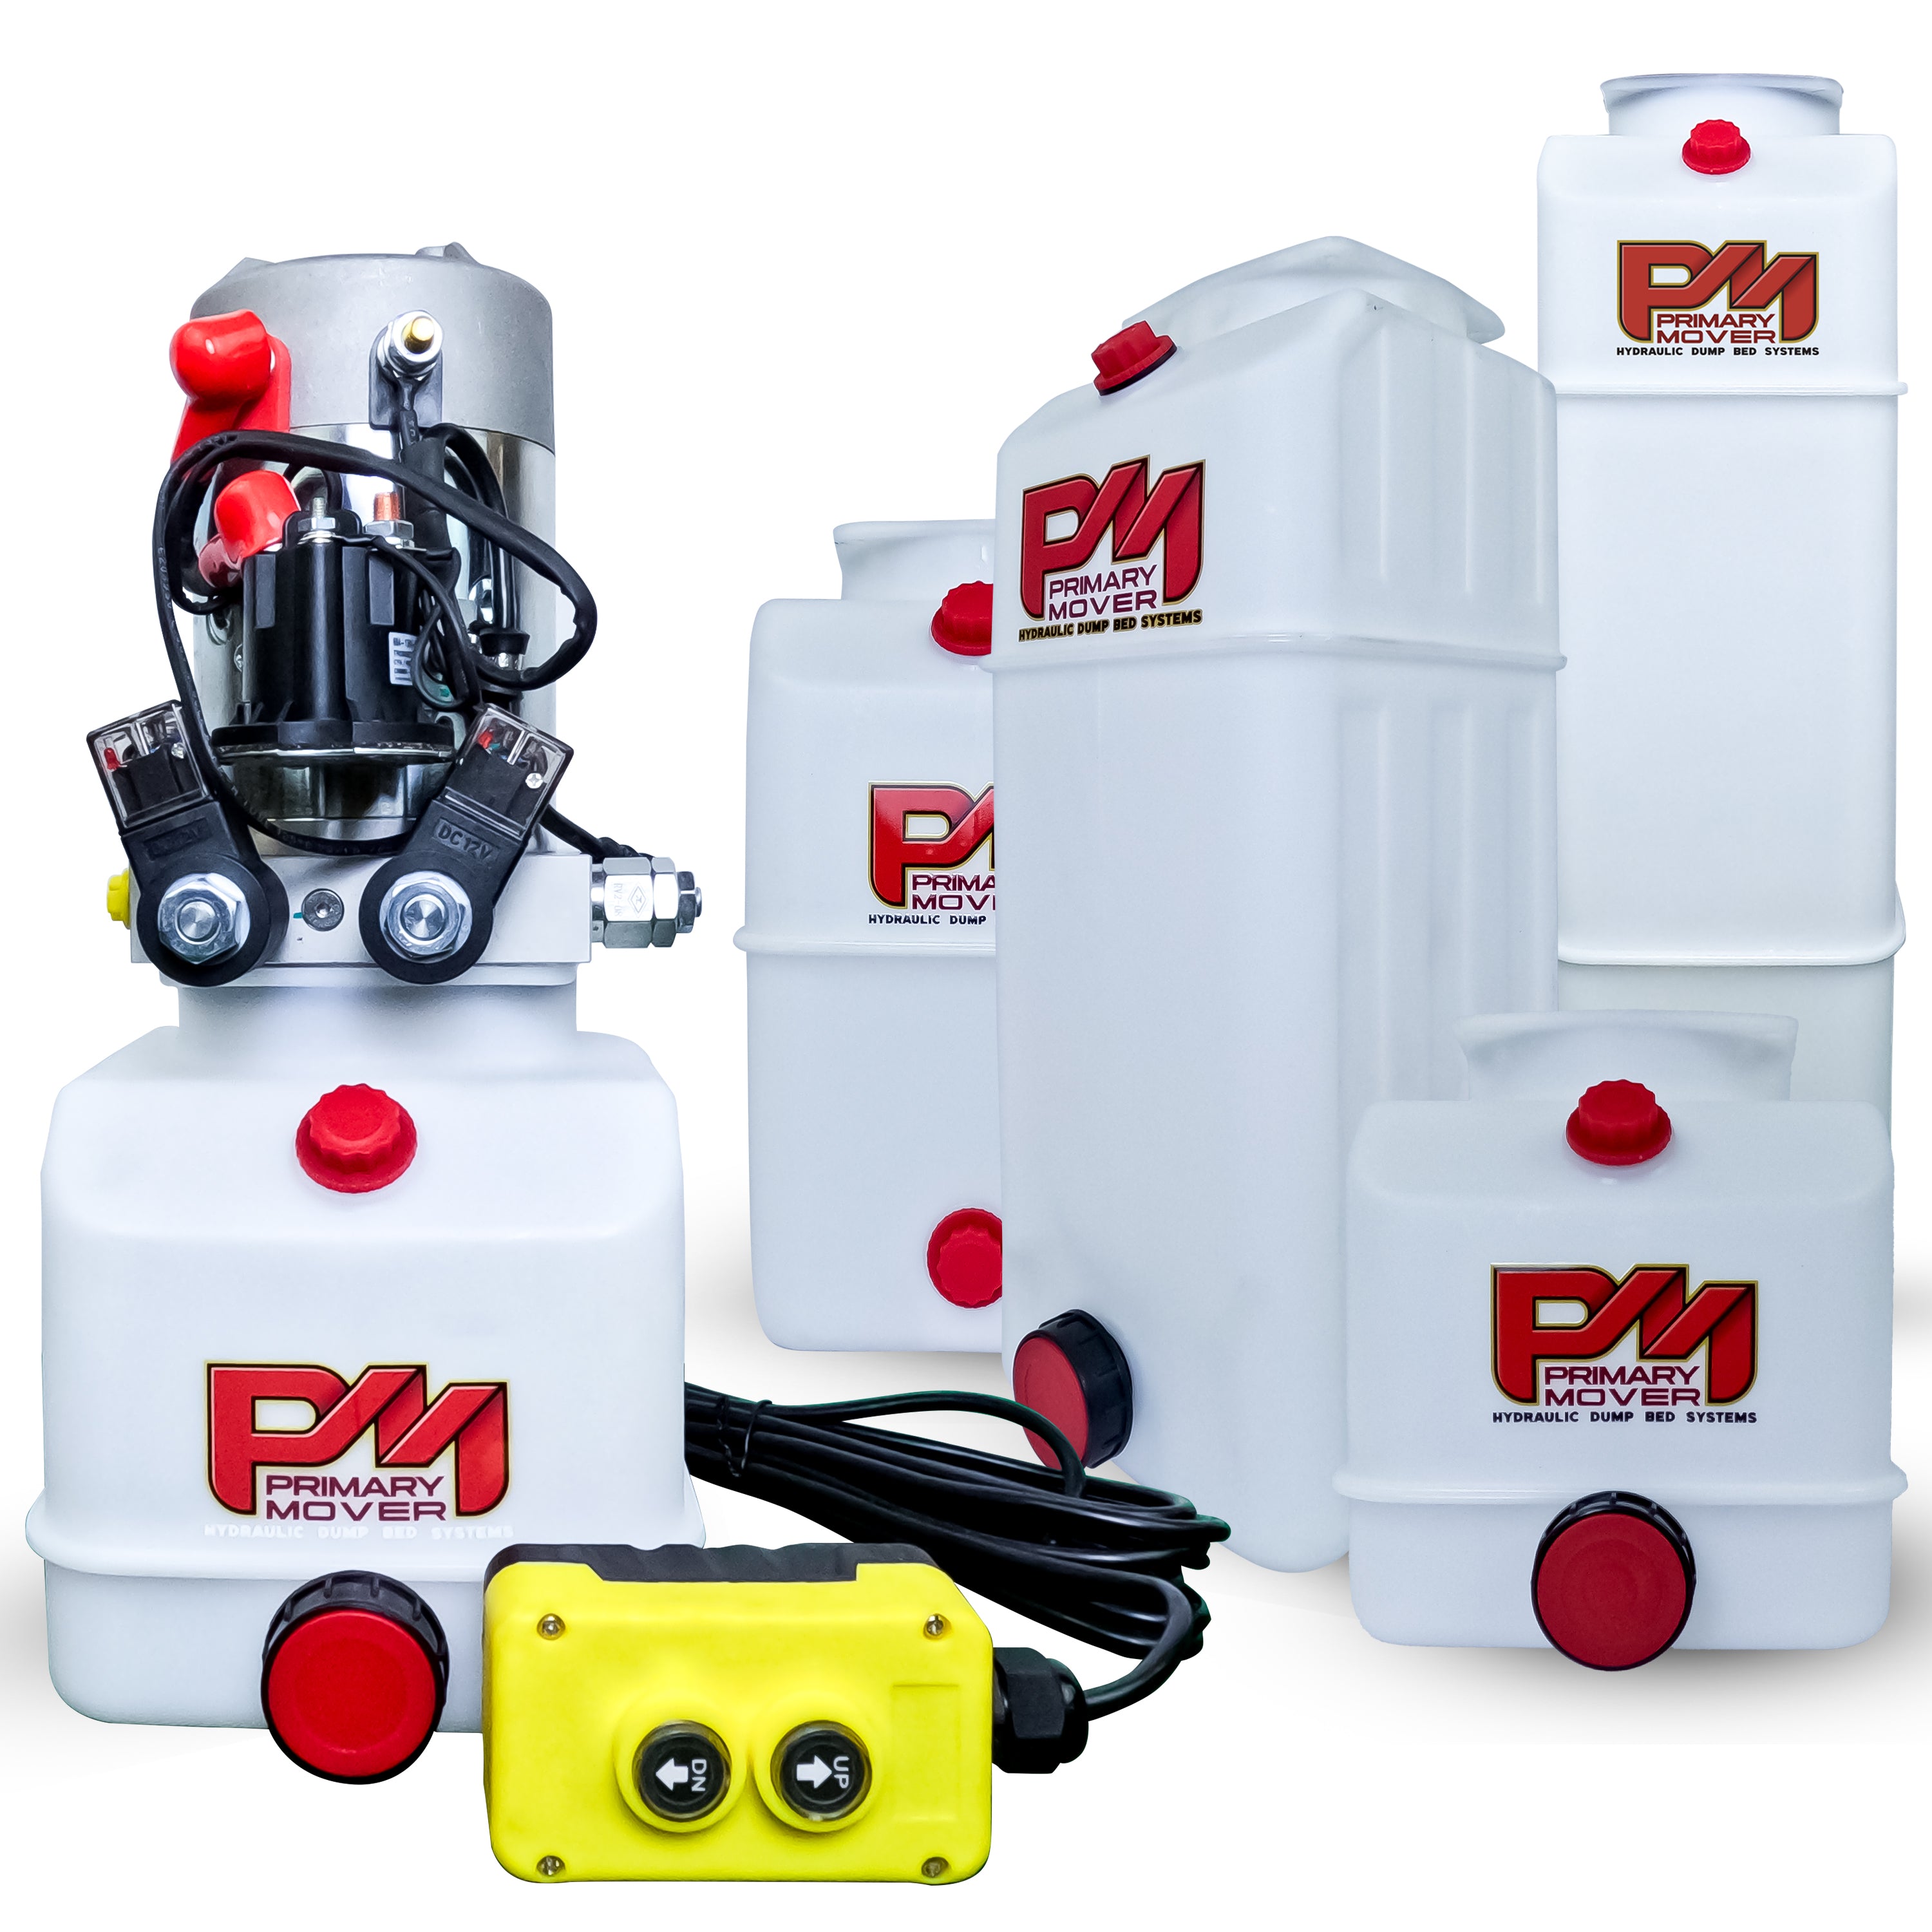 Primary Mover 12V Double-Acting Hydraulic Pump with Poly Reservoir, featuring white containers and red buttons, designed for efficient hydraulic dump bed systems.